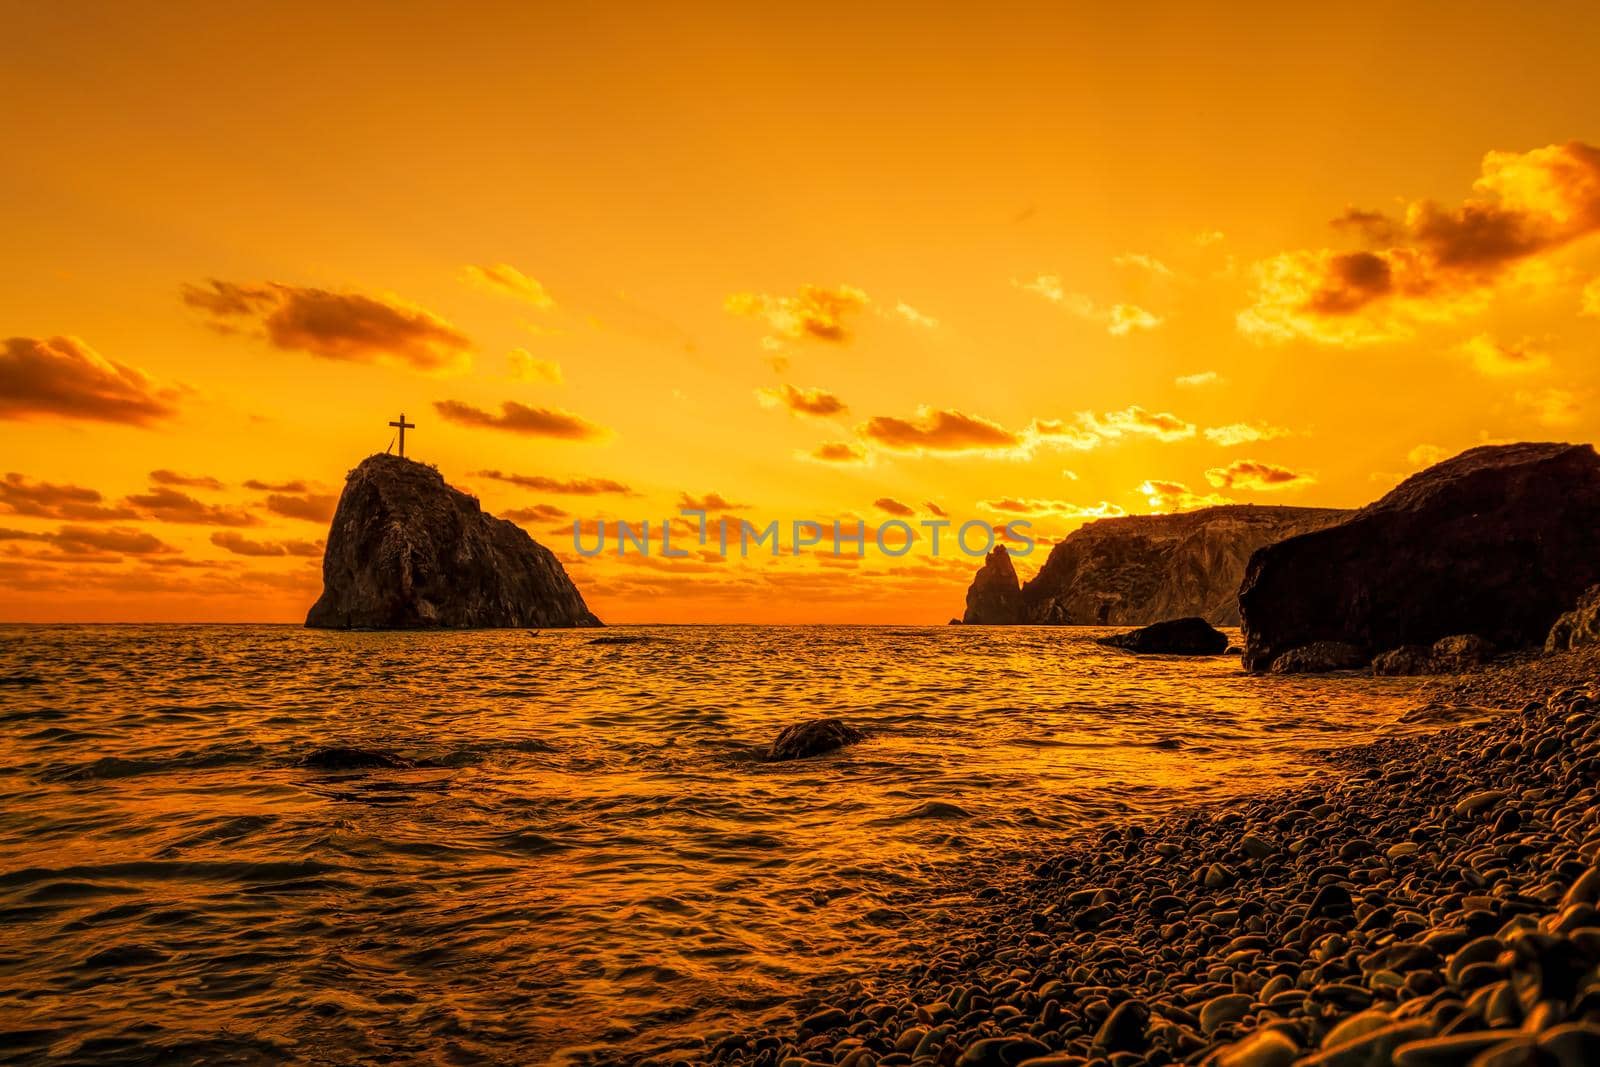 A red burning sunset on pebble beach with the silhouette of a cliff over the sea. Copy space. The concept of calmness, silence and unity with nature. cape Fiolent, Sevastopol, Crimea.